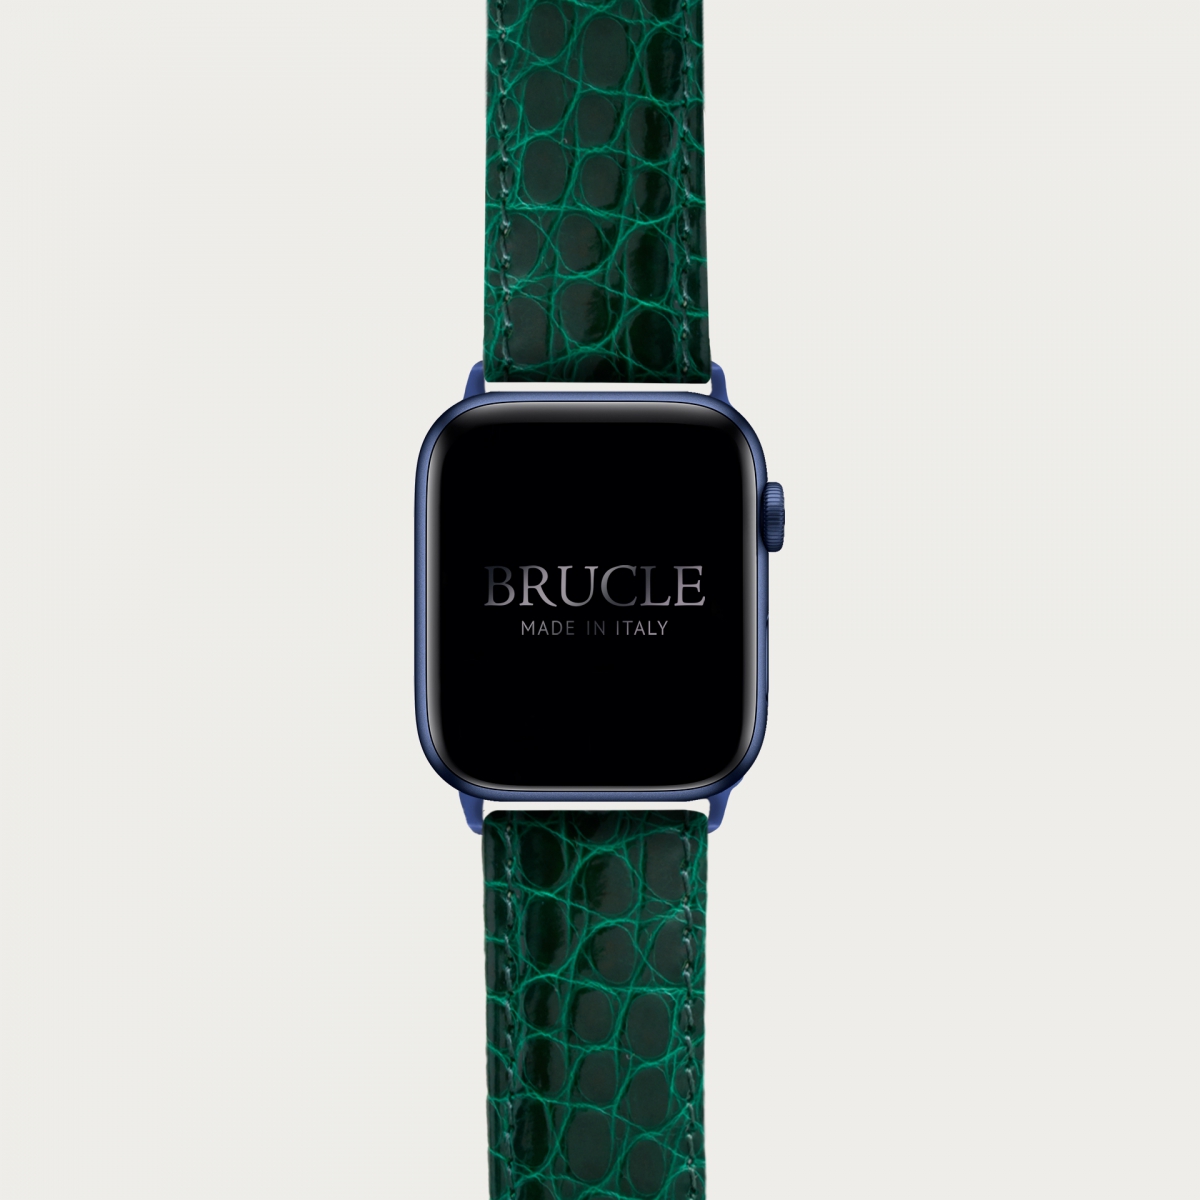 Brucle Alligator Leather Watch band compatible with Apple Watch / Samsung smartwatch, green